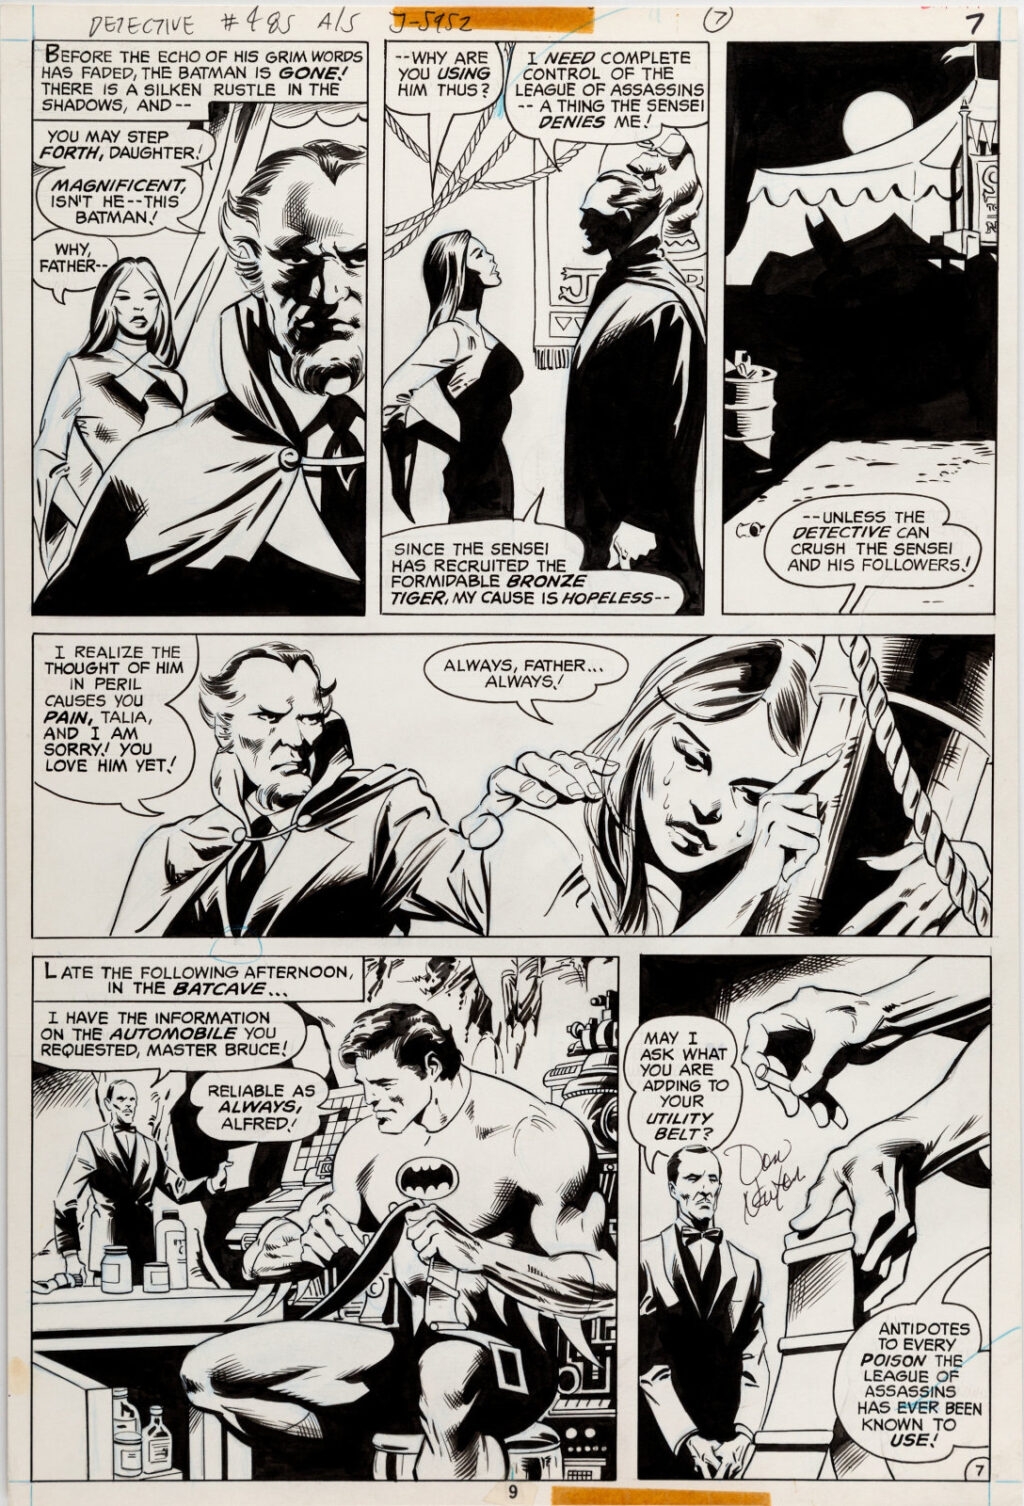 Batman issue 485 page 7 by Don Newton and Dan Adkins